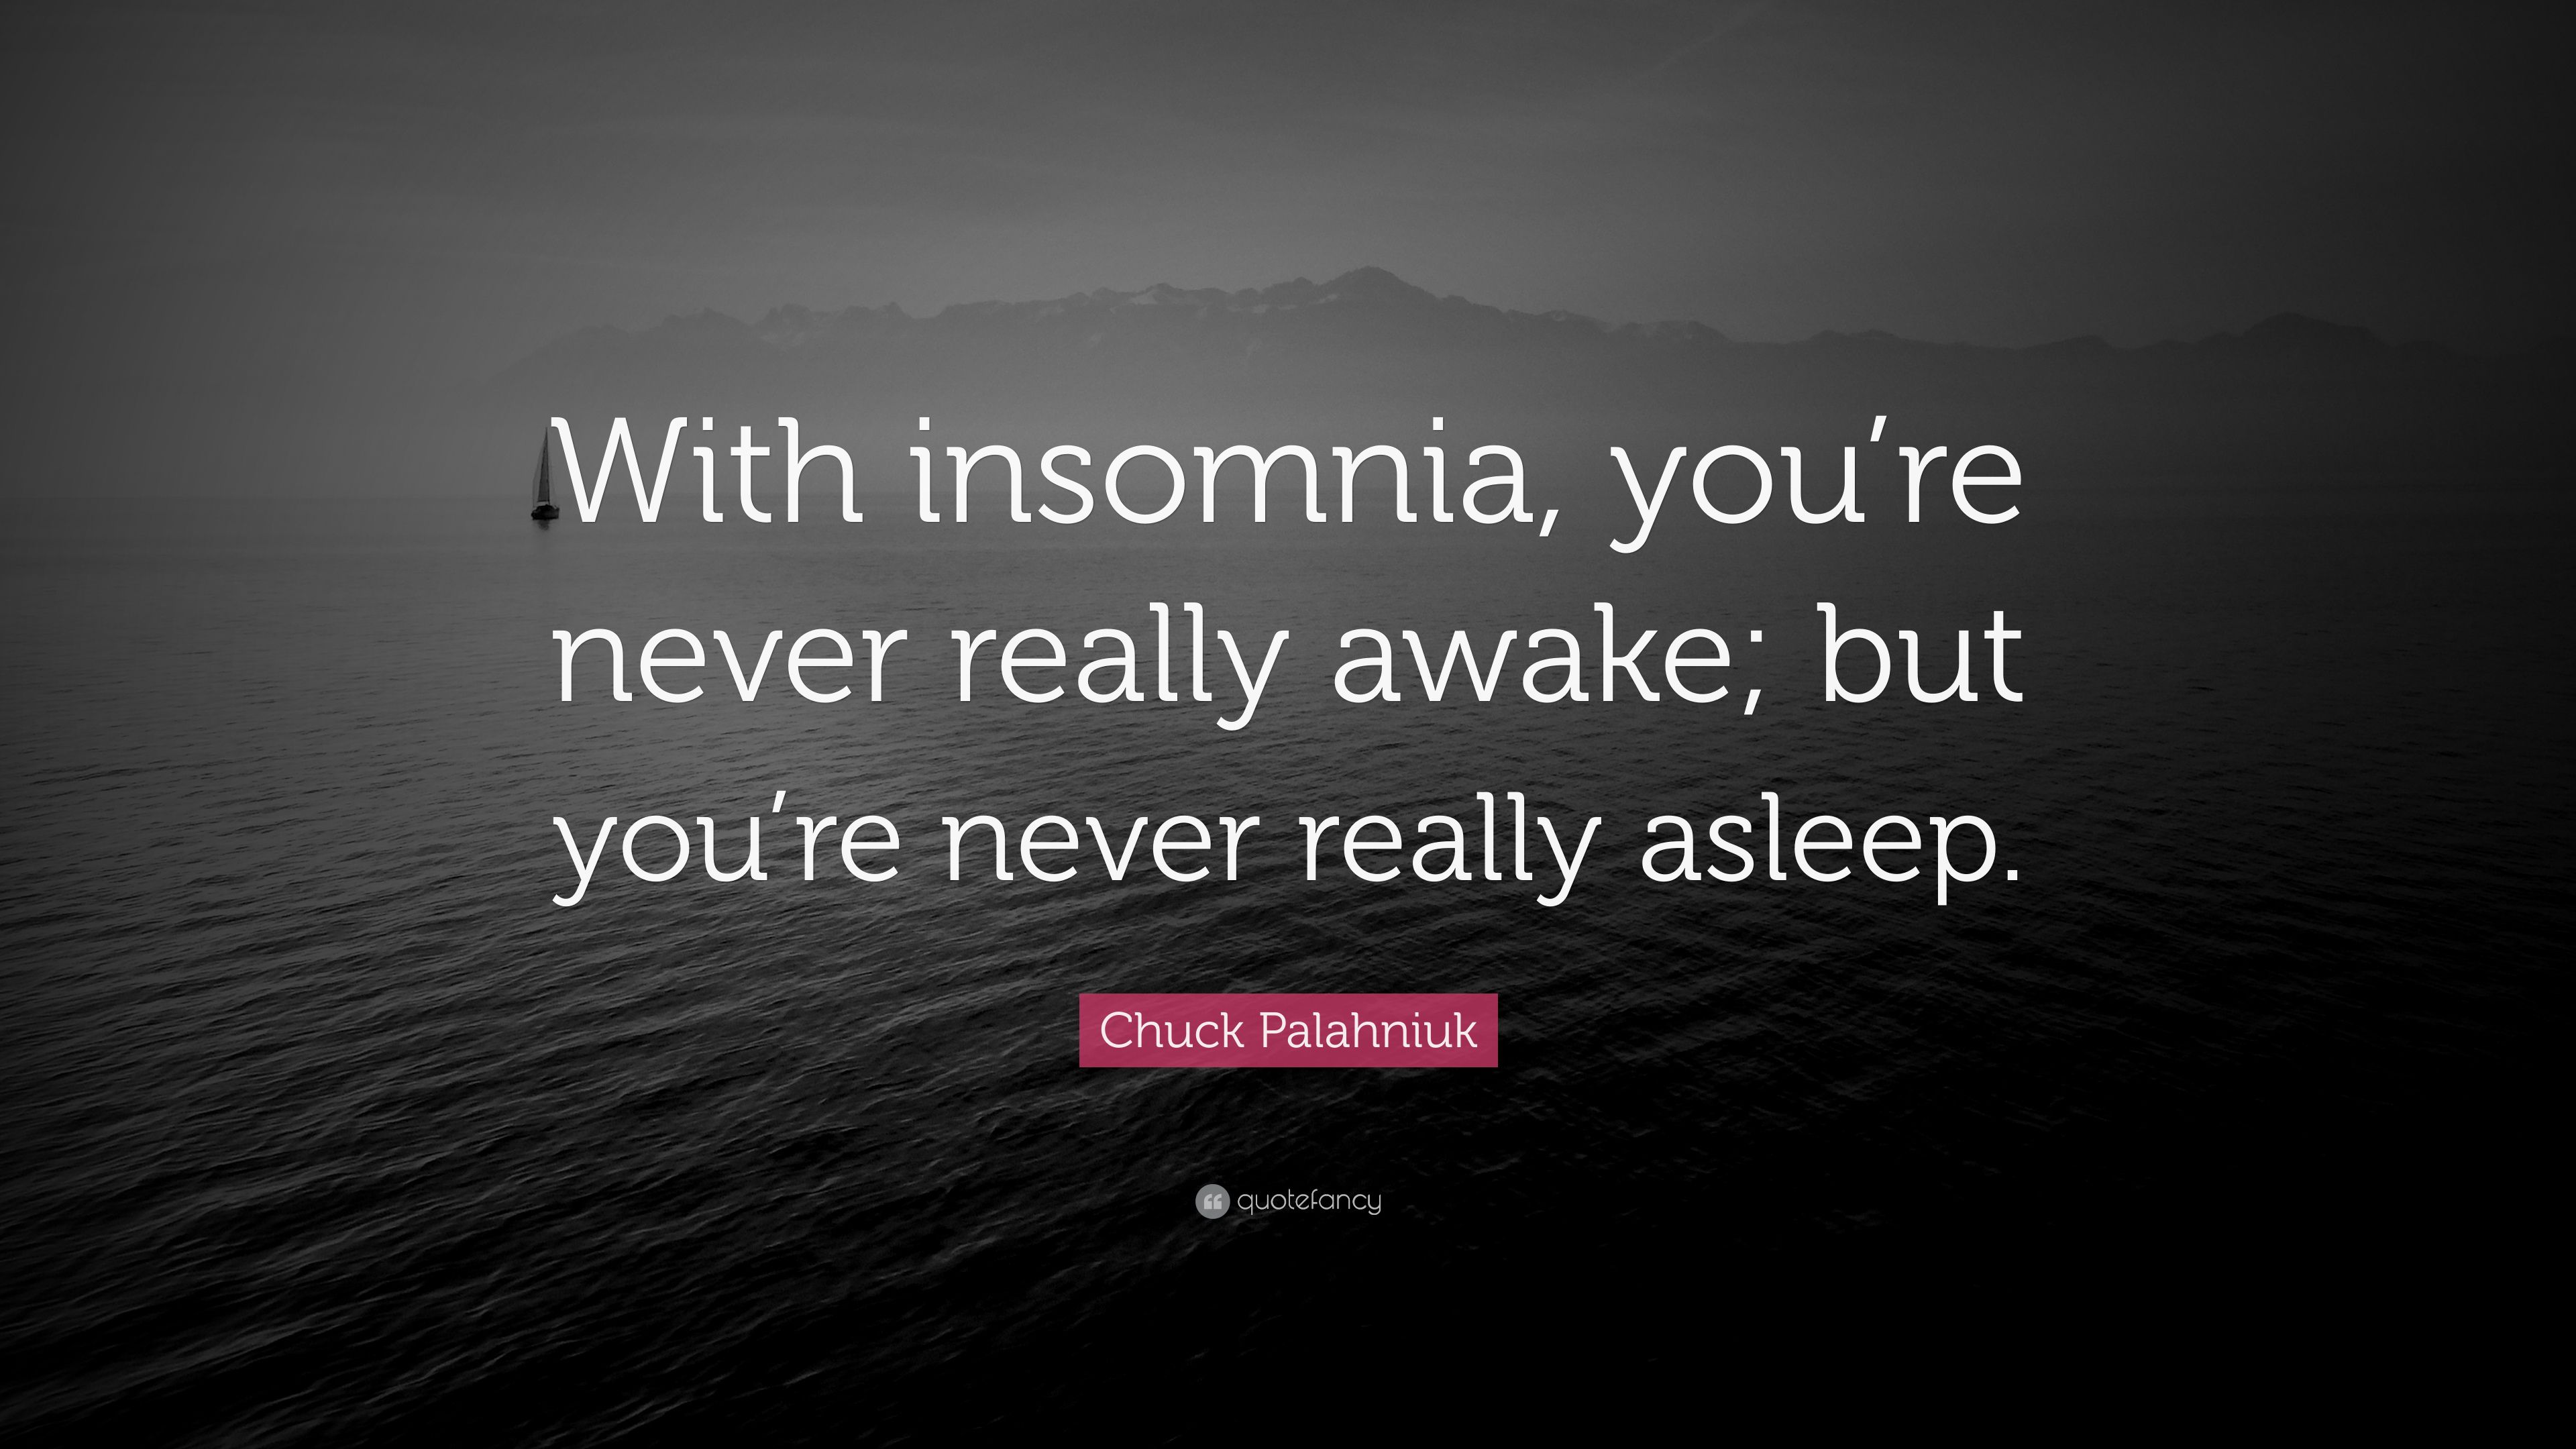 Chuck Palahniuk Quote: “With insomnia, you're never really awake